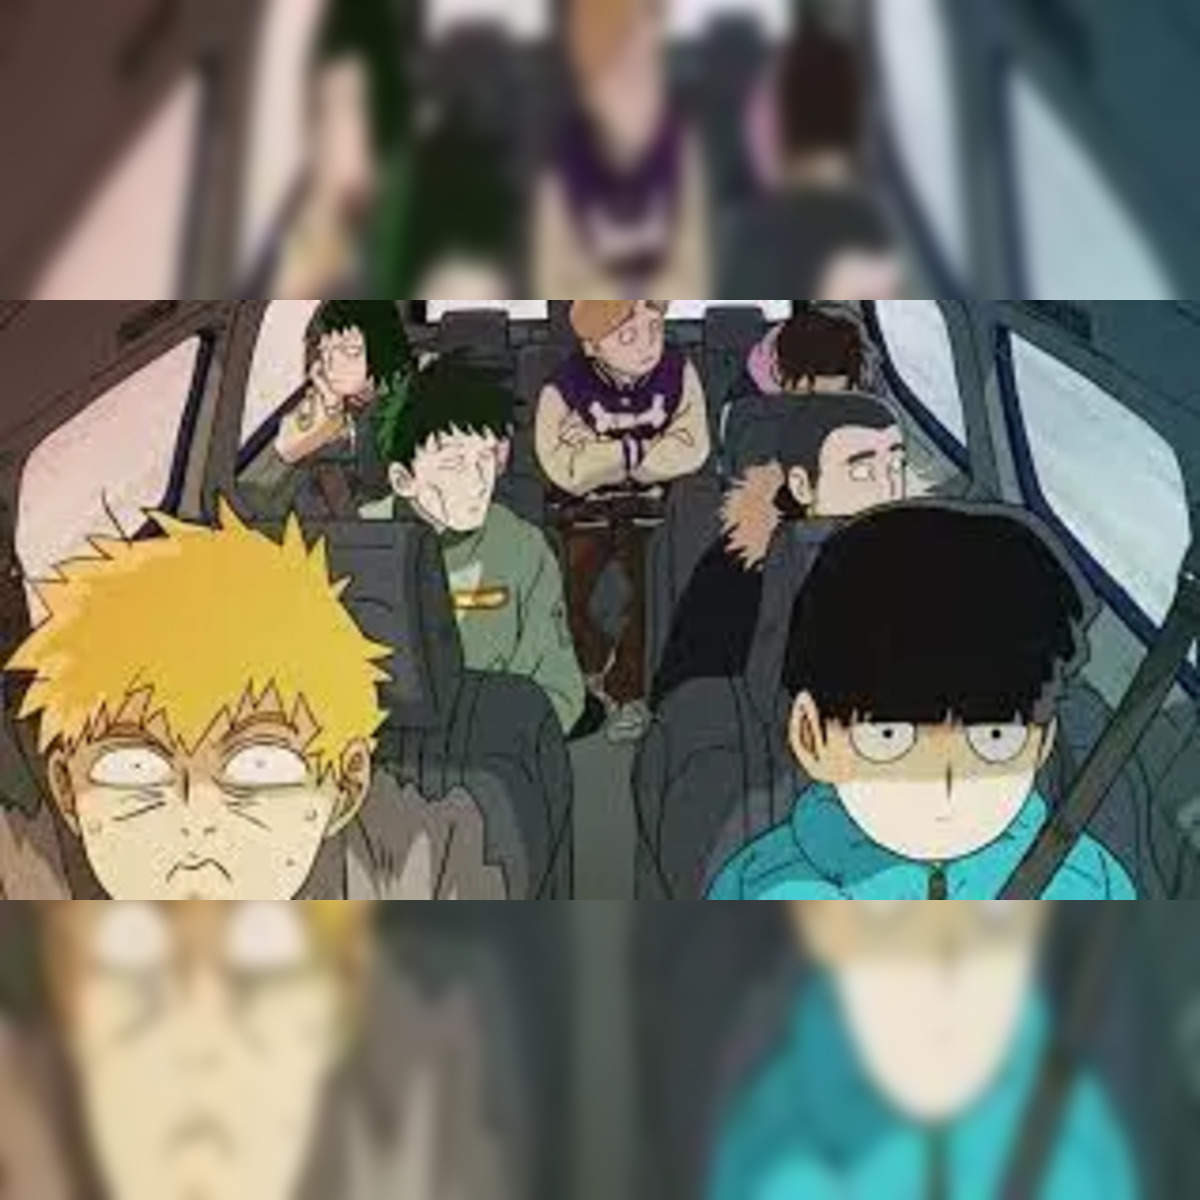 Mob Psycho 100 new trailer confirms the release month for season 3